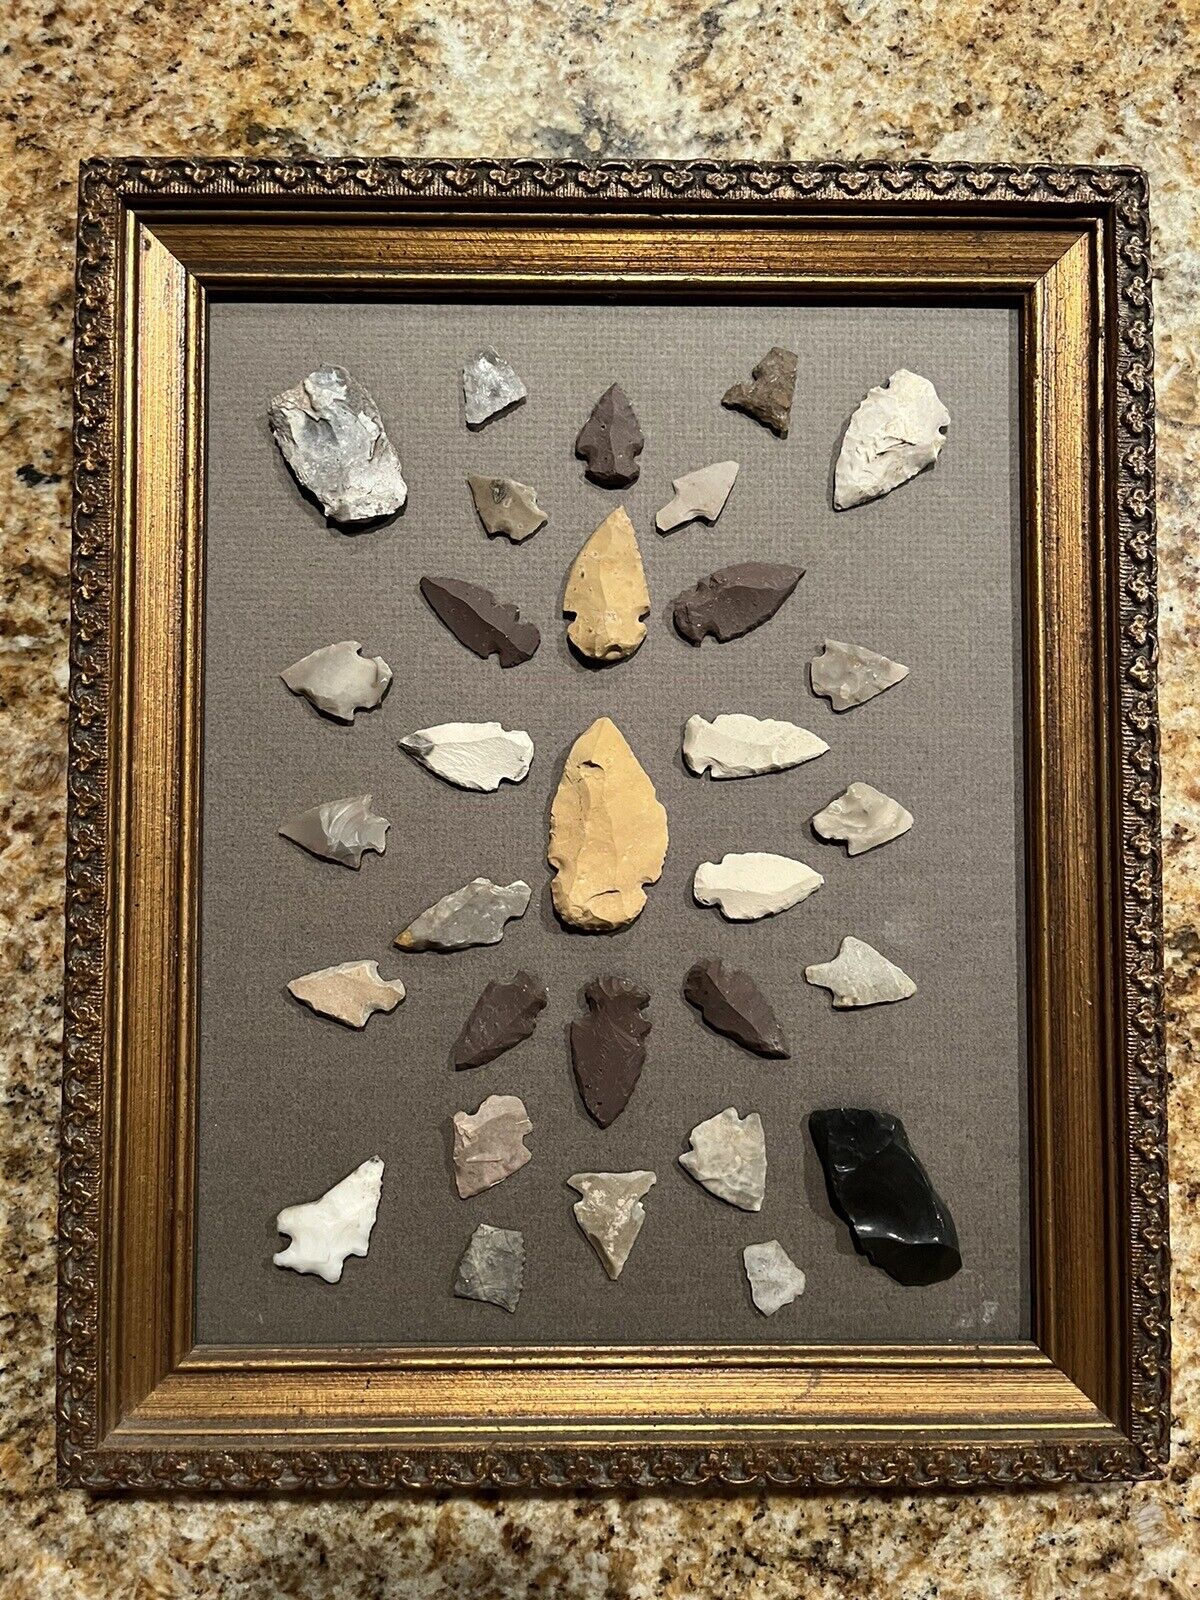 Framed Native American Arrowhead And Bird Point Collection Total Of 31 Items